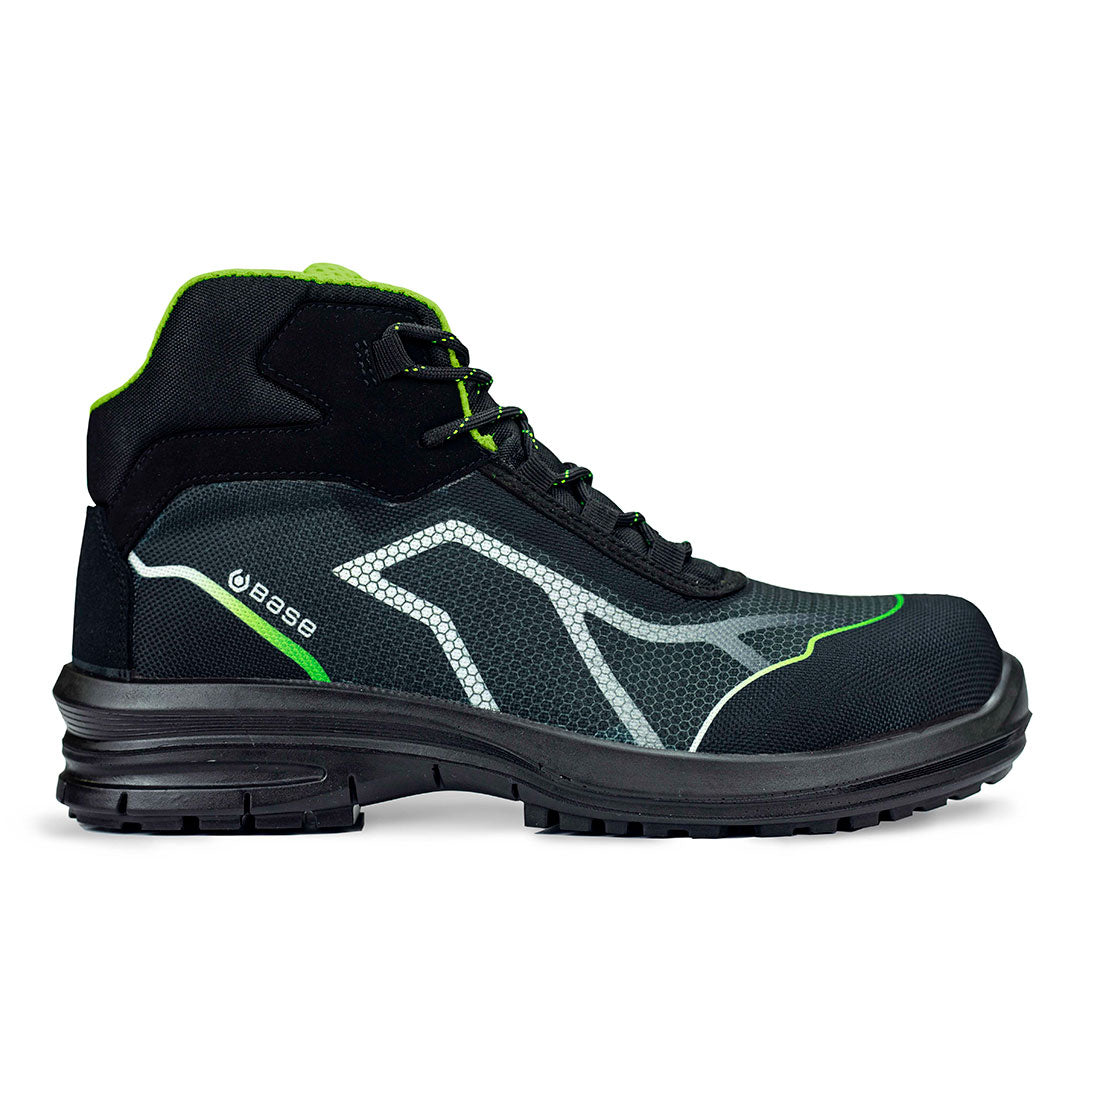 Portwest B0979 Oren Top S3 Safety Trainers (Black/Green)